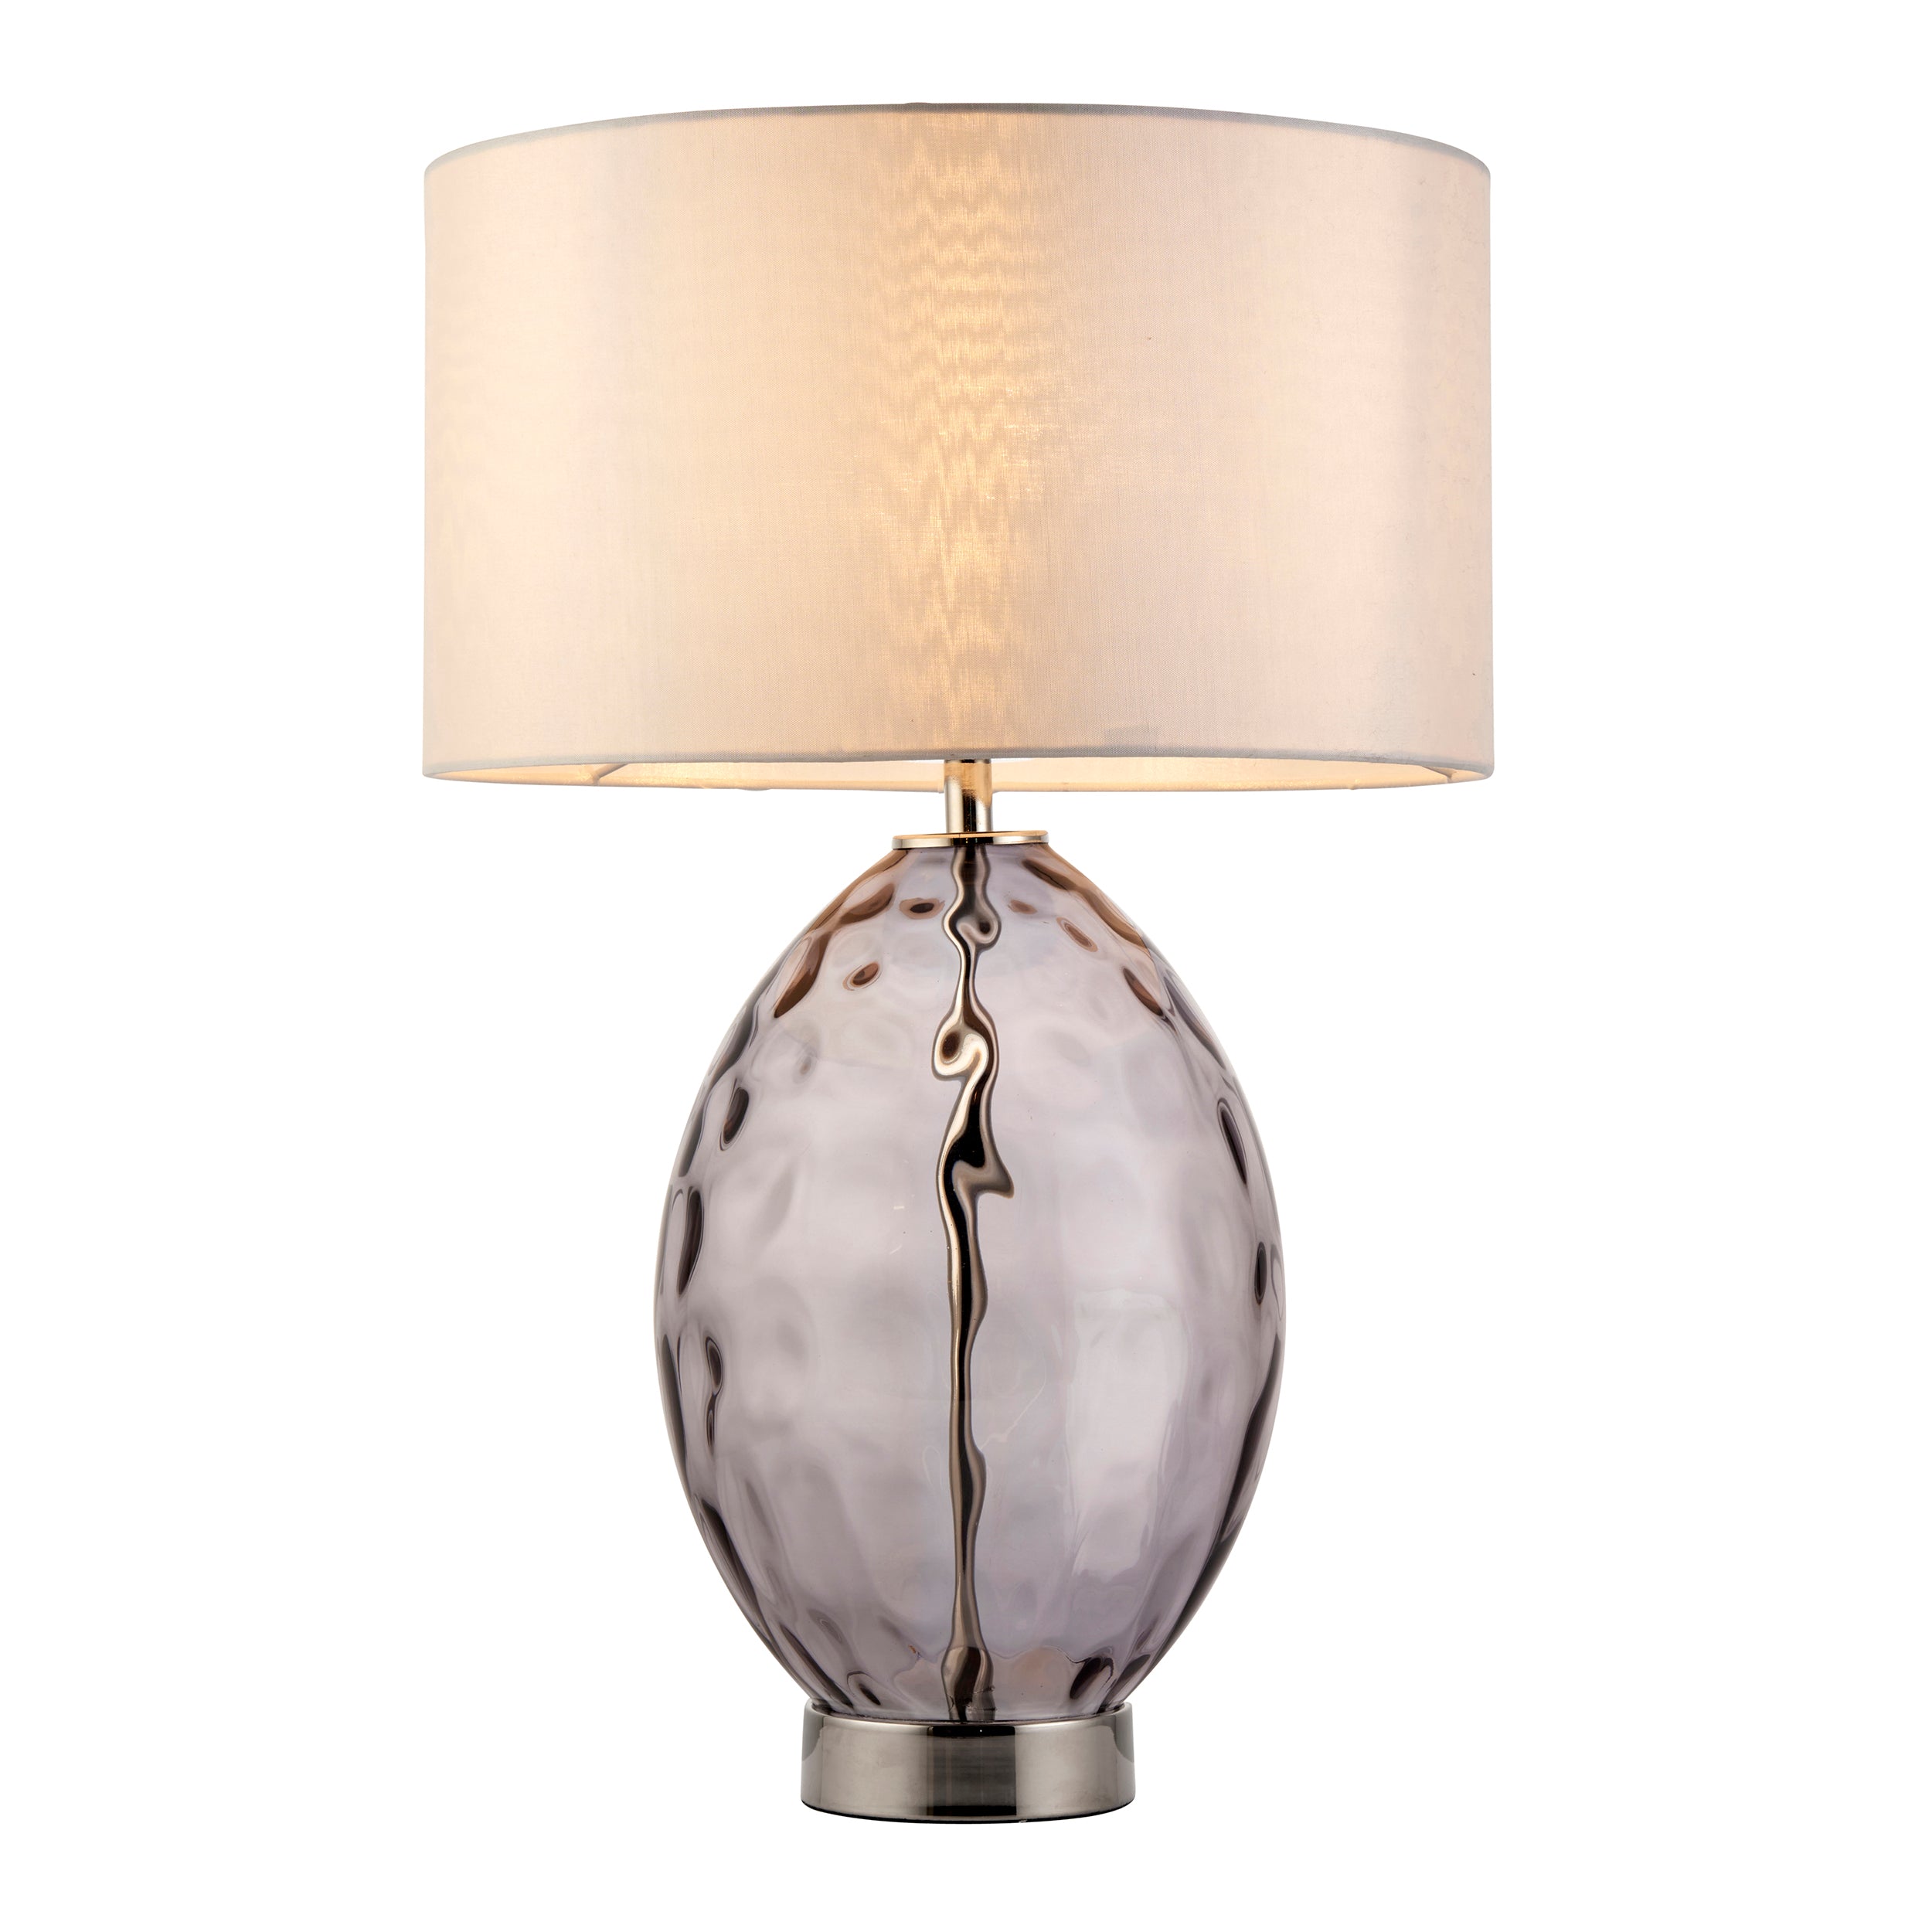 Lightologist Grey tinted glass, bright nickel plate with vintage white fabric Base & shade Table Light WIN1399581